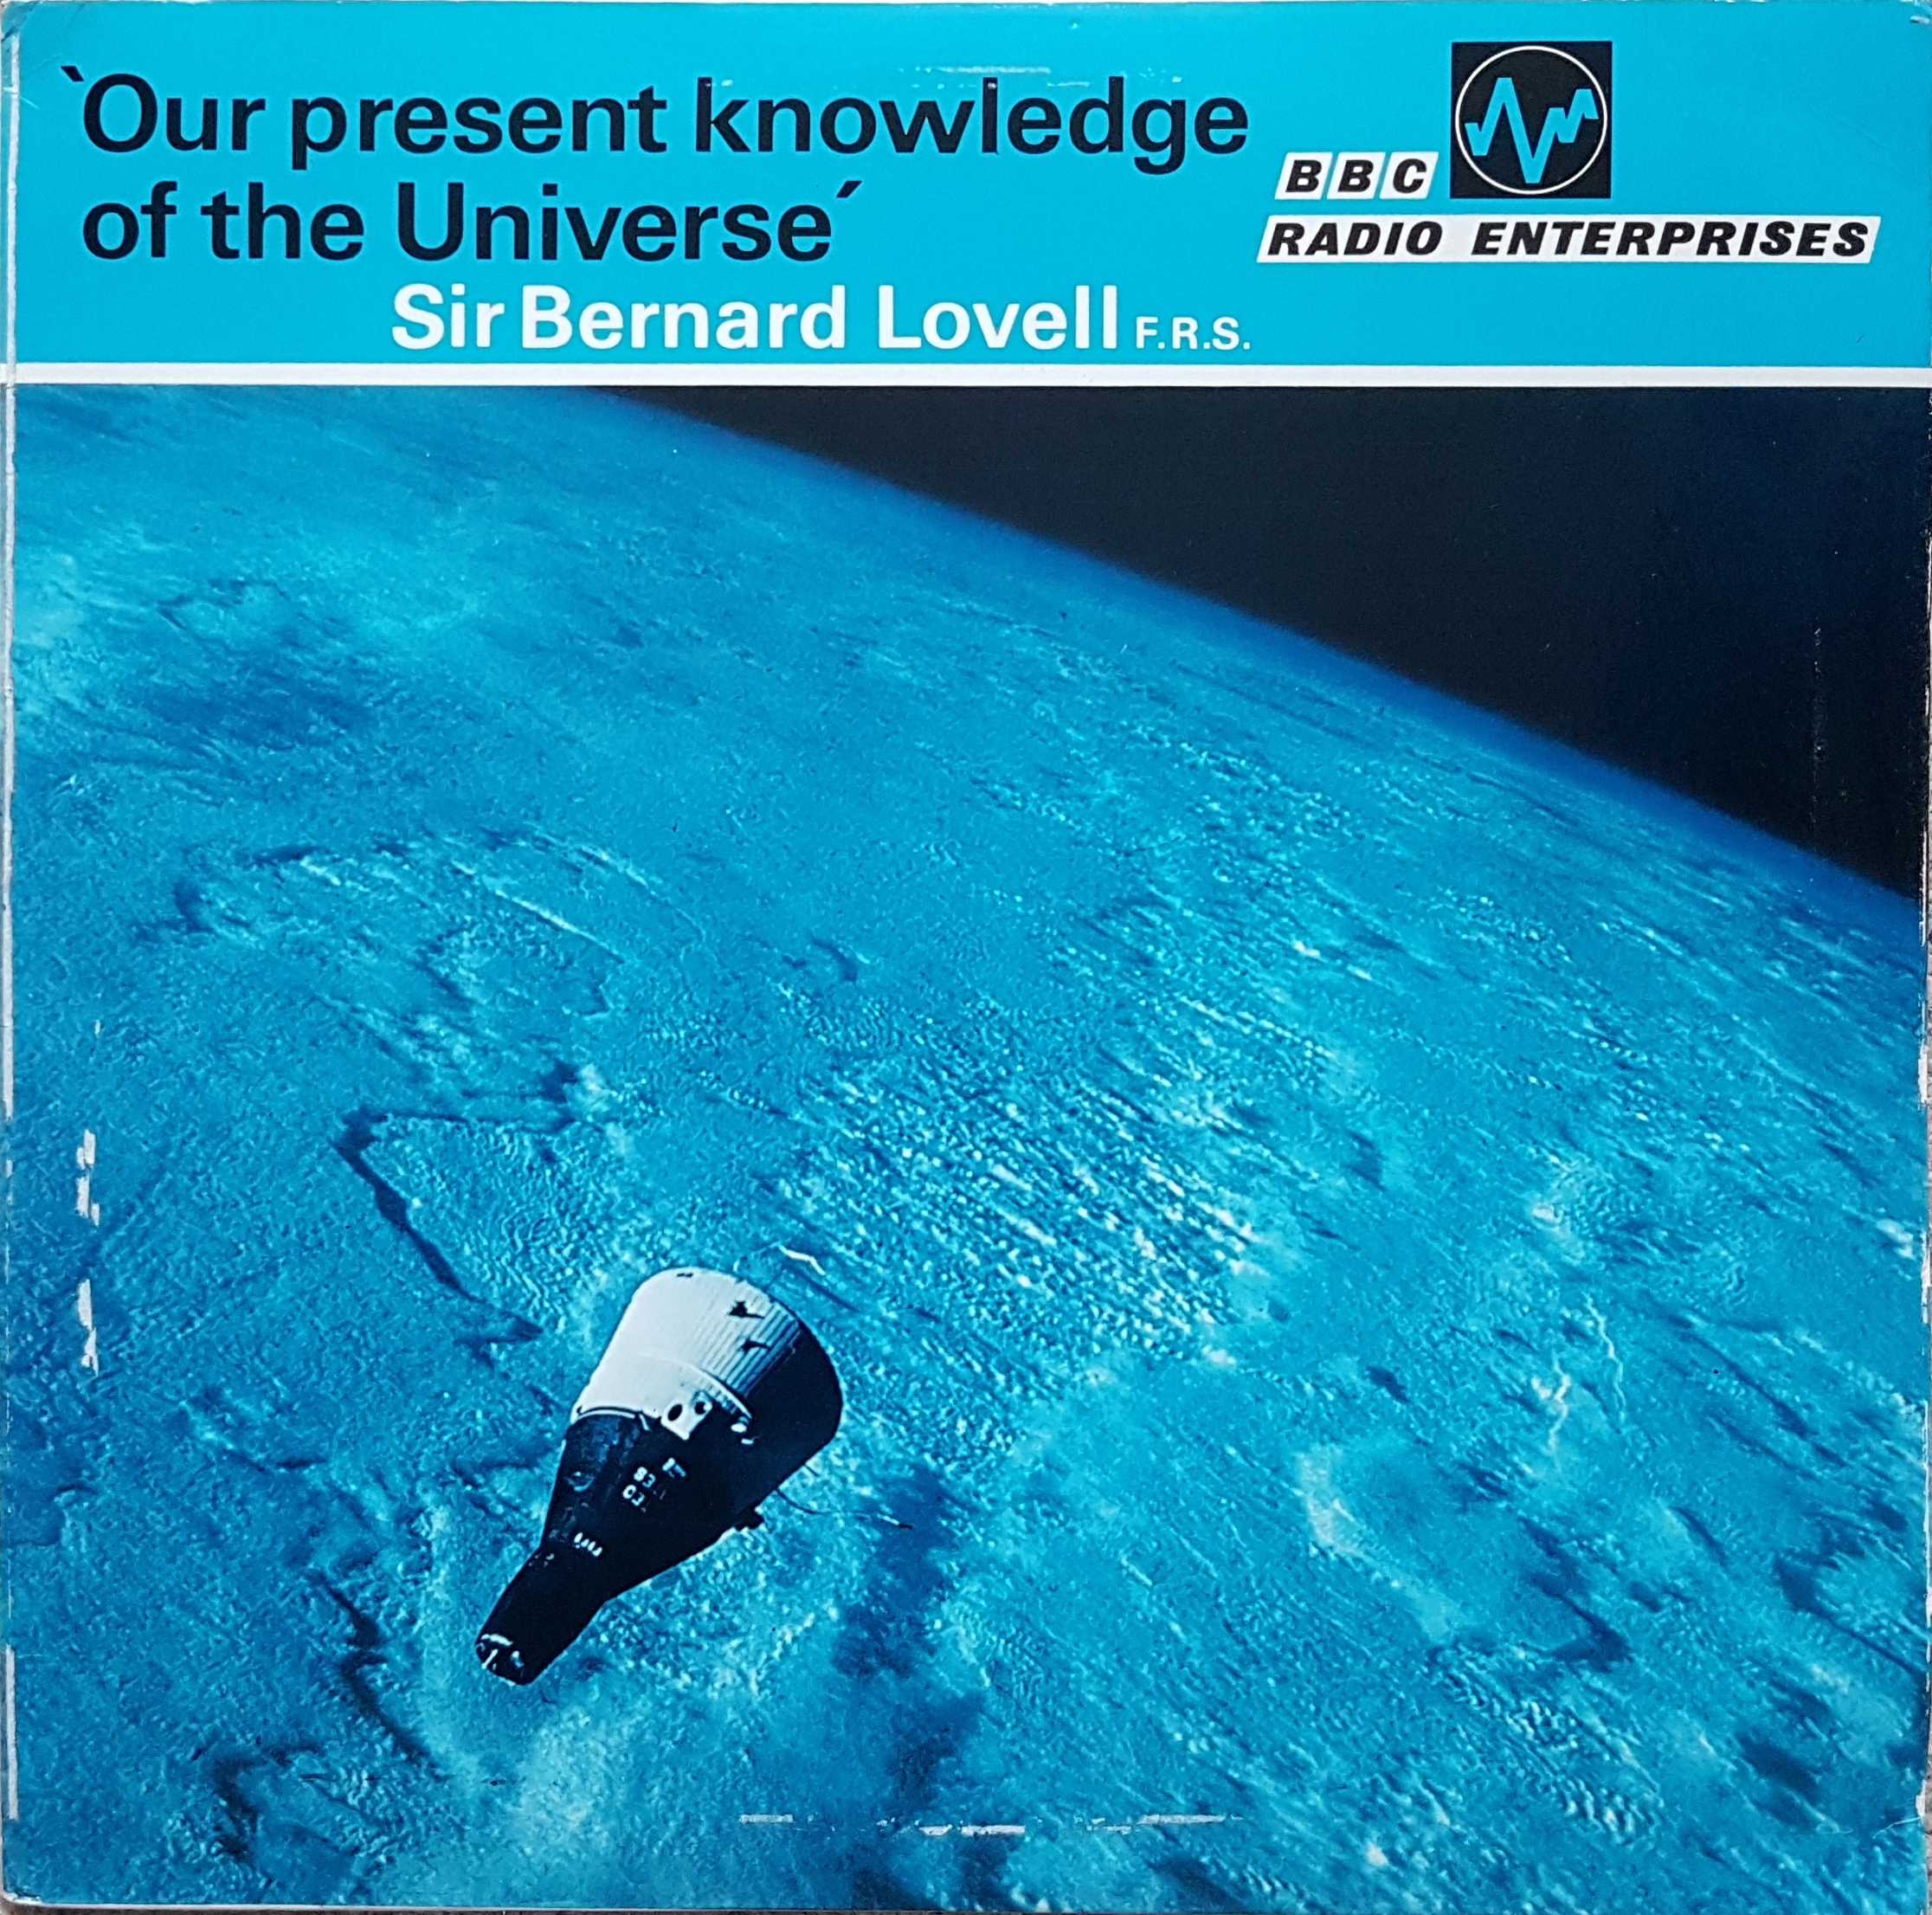 Picture of RE 2 Our present knowledge of the Universe by artist Sir Bernard Lovell from the BBC albums - Records and Tapes library